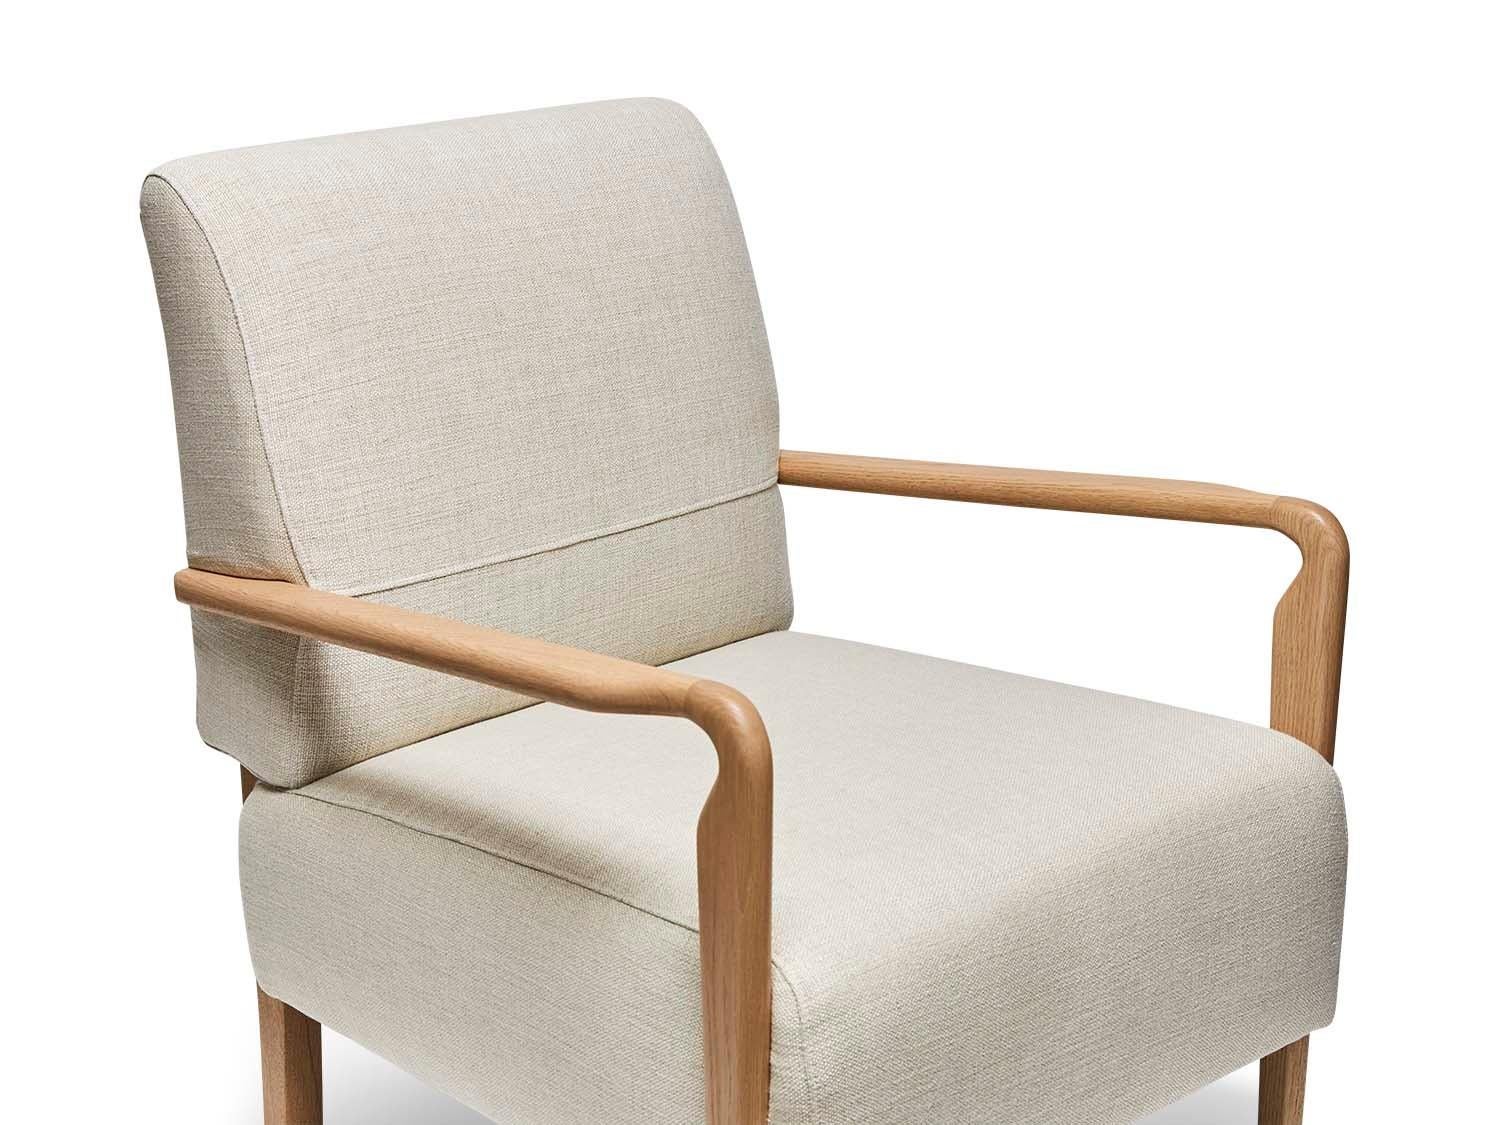 American Oak and Linen Niguel Lounge Chair by Lawson-Fenning